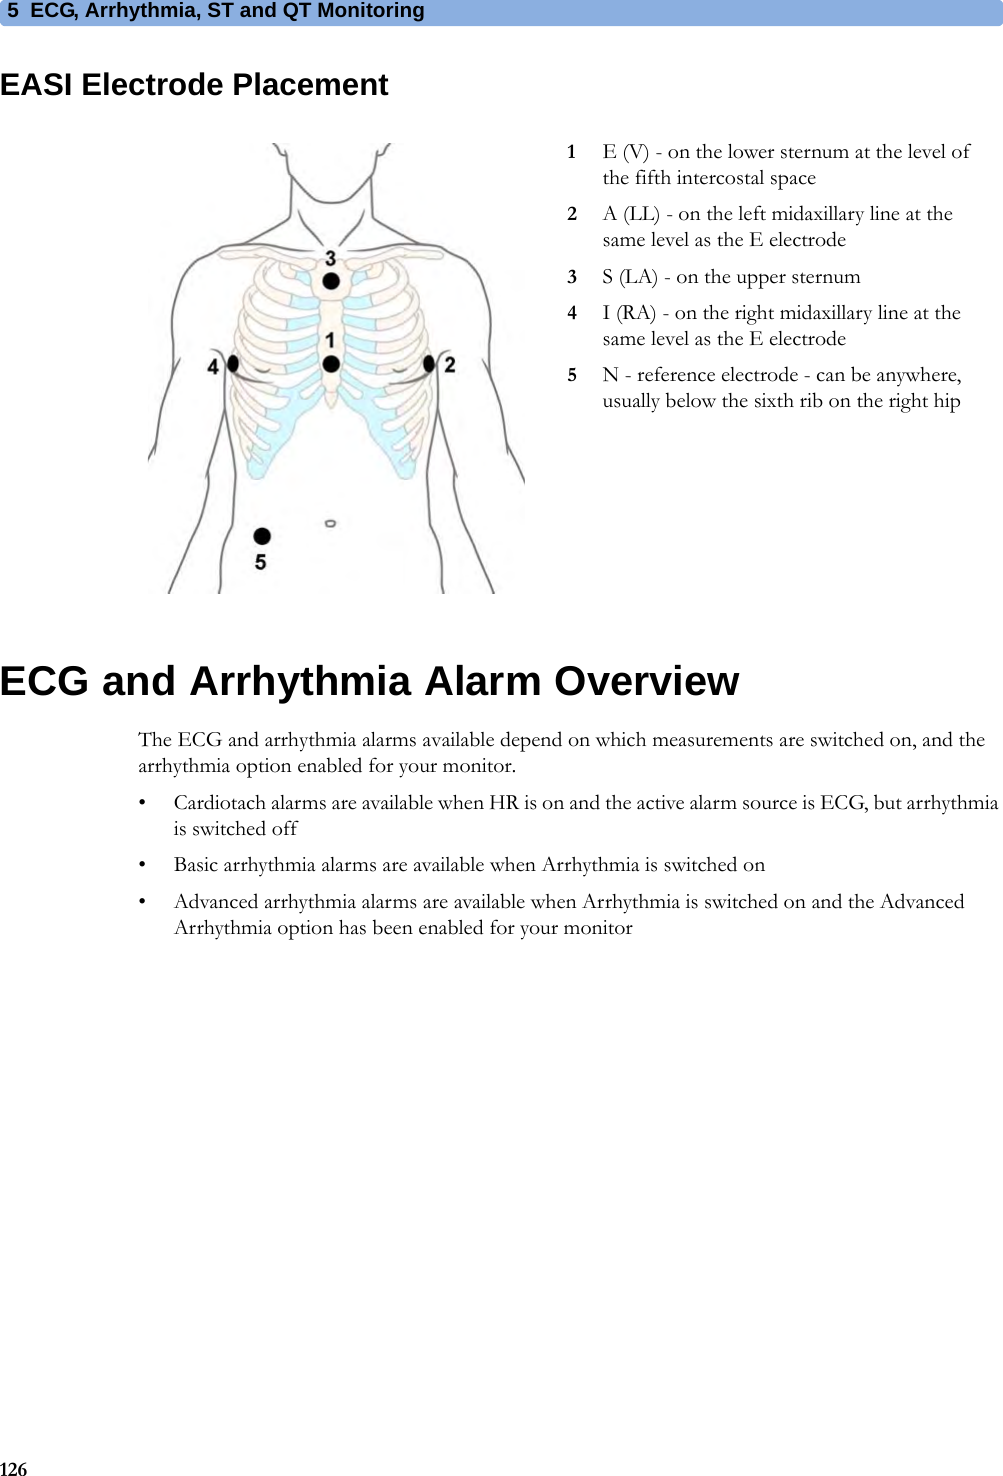 5 ECG, Arrhythmia, ST and QT Monitoring126EASI Electrode PlacementECG and Arrhythmia Alarm OverviewThe ECG and arrhythmia alarms available depend on which measurements are switched on, and the arrhythmia option enabled for your monitor.• Cardiotach alarms are available when HR is on and the active alarm source is ECG, but arrhythmia is switched off• Basic arrhythmia alarms are available when Arrhythmia is switched on• Advanced arrhythmia alarms are available when Arrhythmia is switched on and the Advanced Arrhythmia option has been enabled for your monitor1E (V) - on the lower sternum at the level of the fifth intercostal space2A (LL) - on the left midaxillary line at the same level as the E electrode3S (LA) - on the upper sternum4I (RA) - on the right midaxillary line at the same level as the E electrode5N - reference electrode - can be anywhere, usually below the sixth rib on the right hip